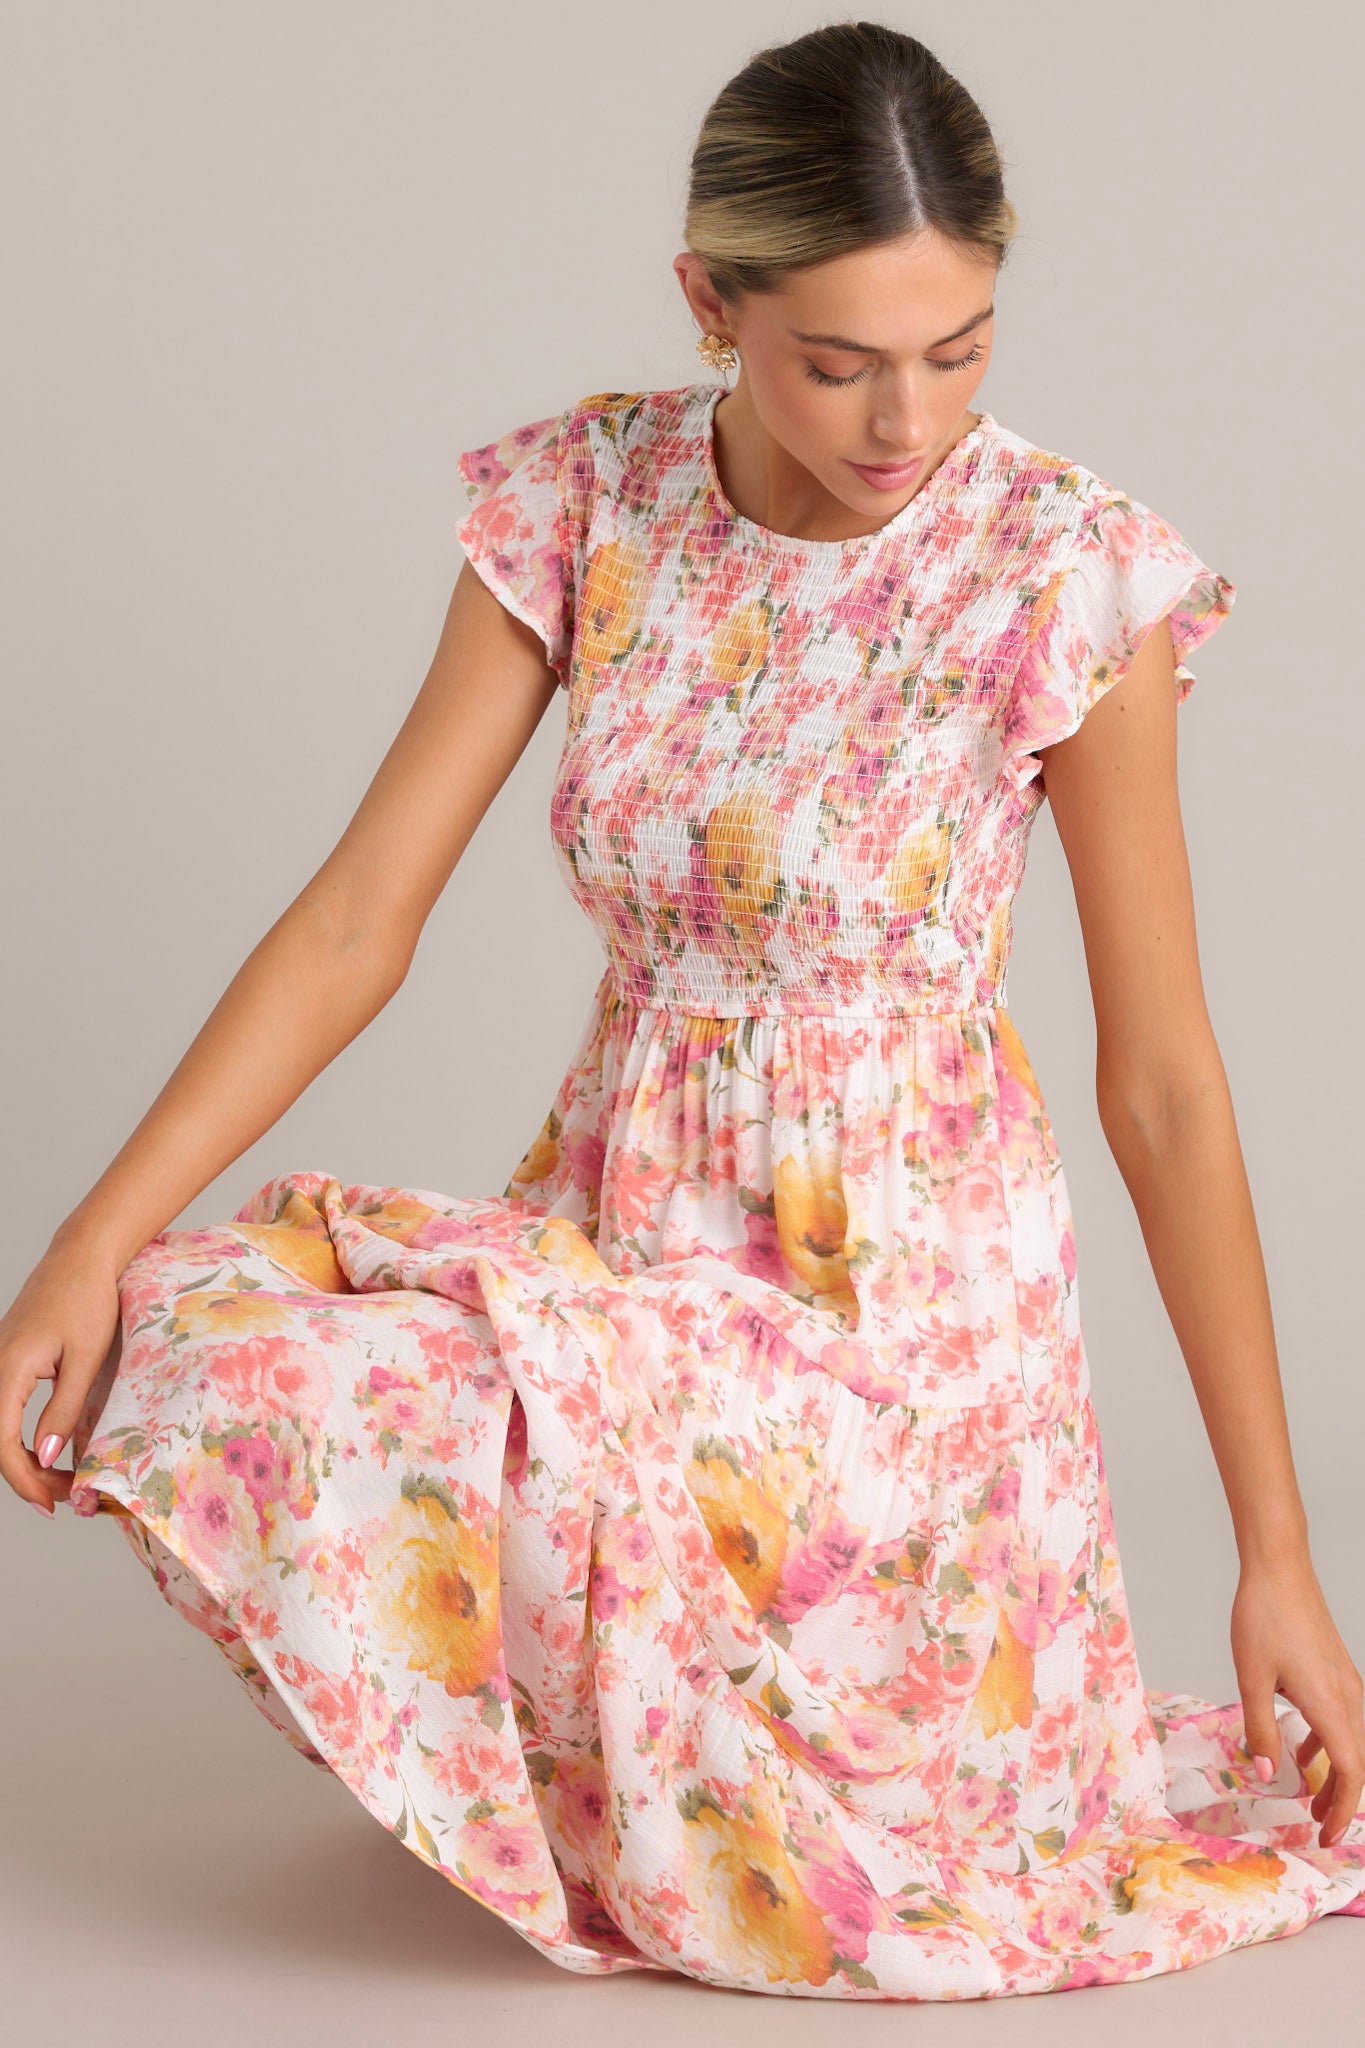 Close-up of this pink floral midi dress showing the high neckline, smocked bodice, and flutter sleeves with the colorful floral pattern.